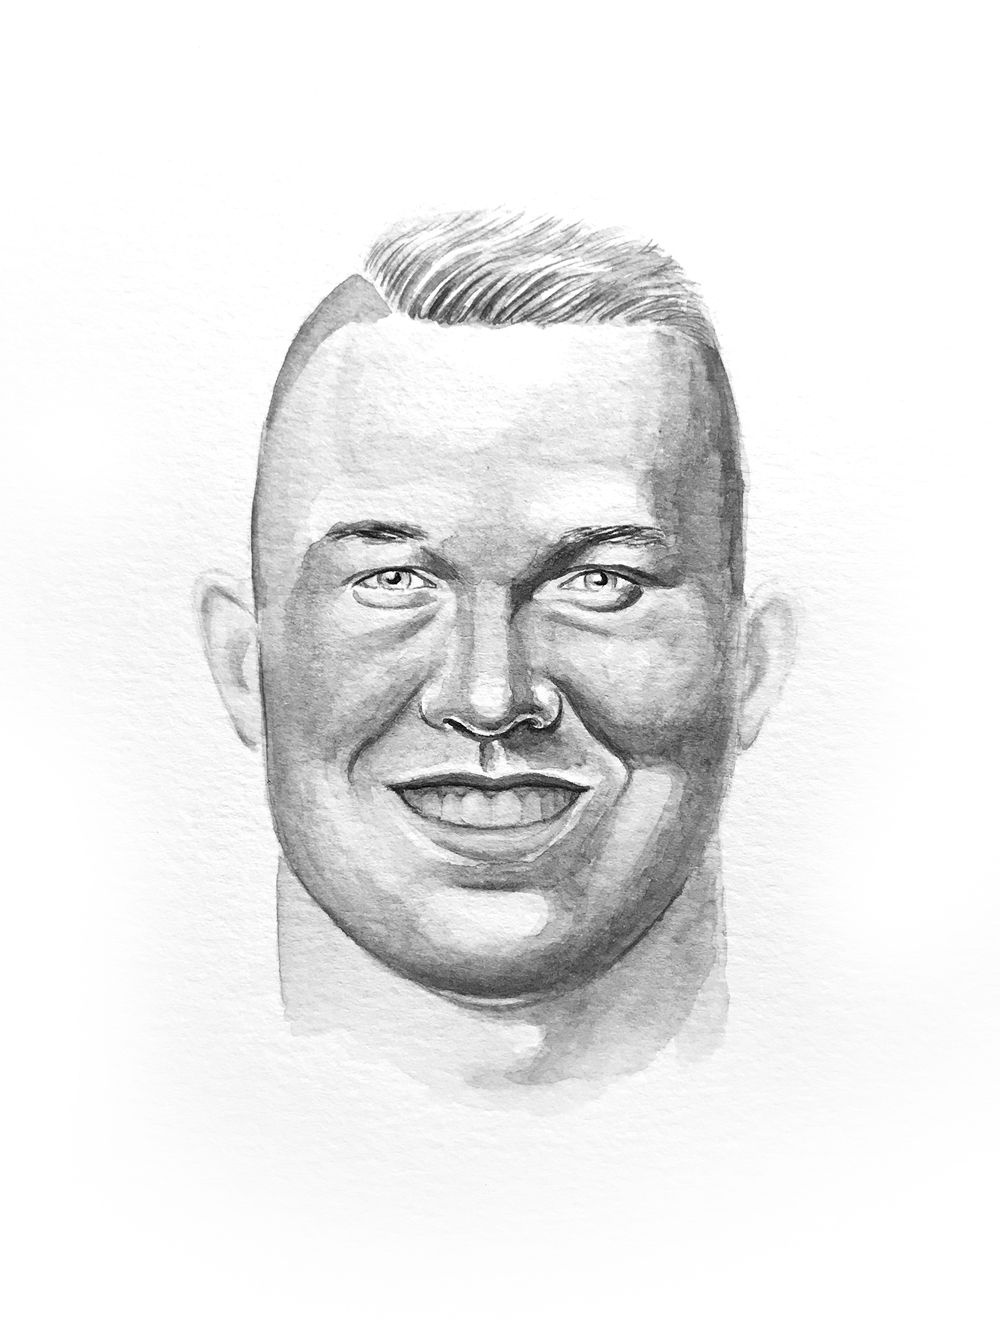 A drawing of Mike Trout